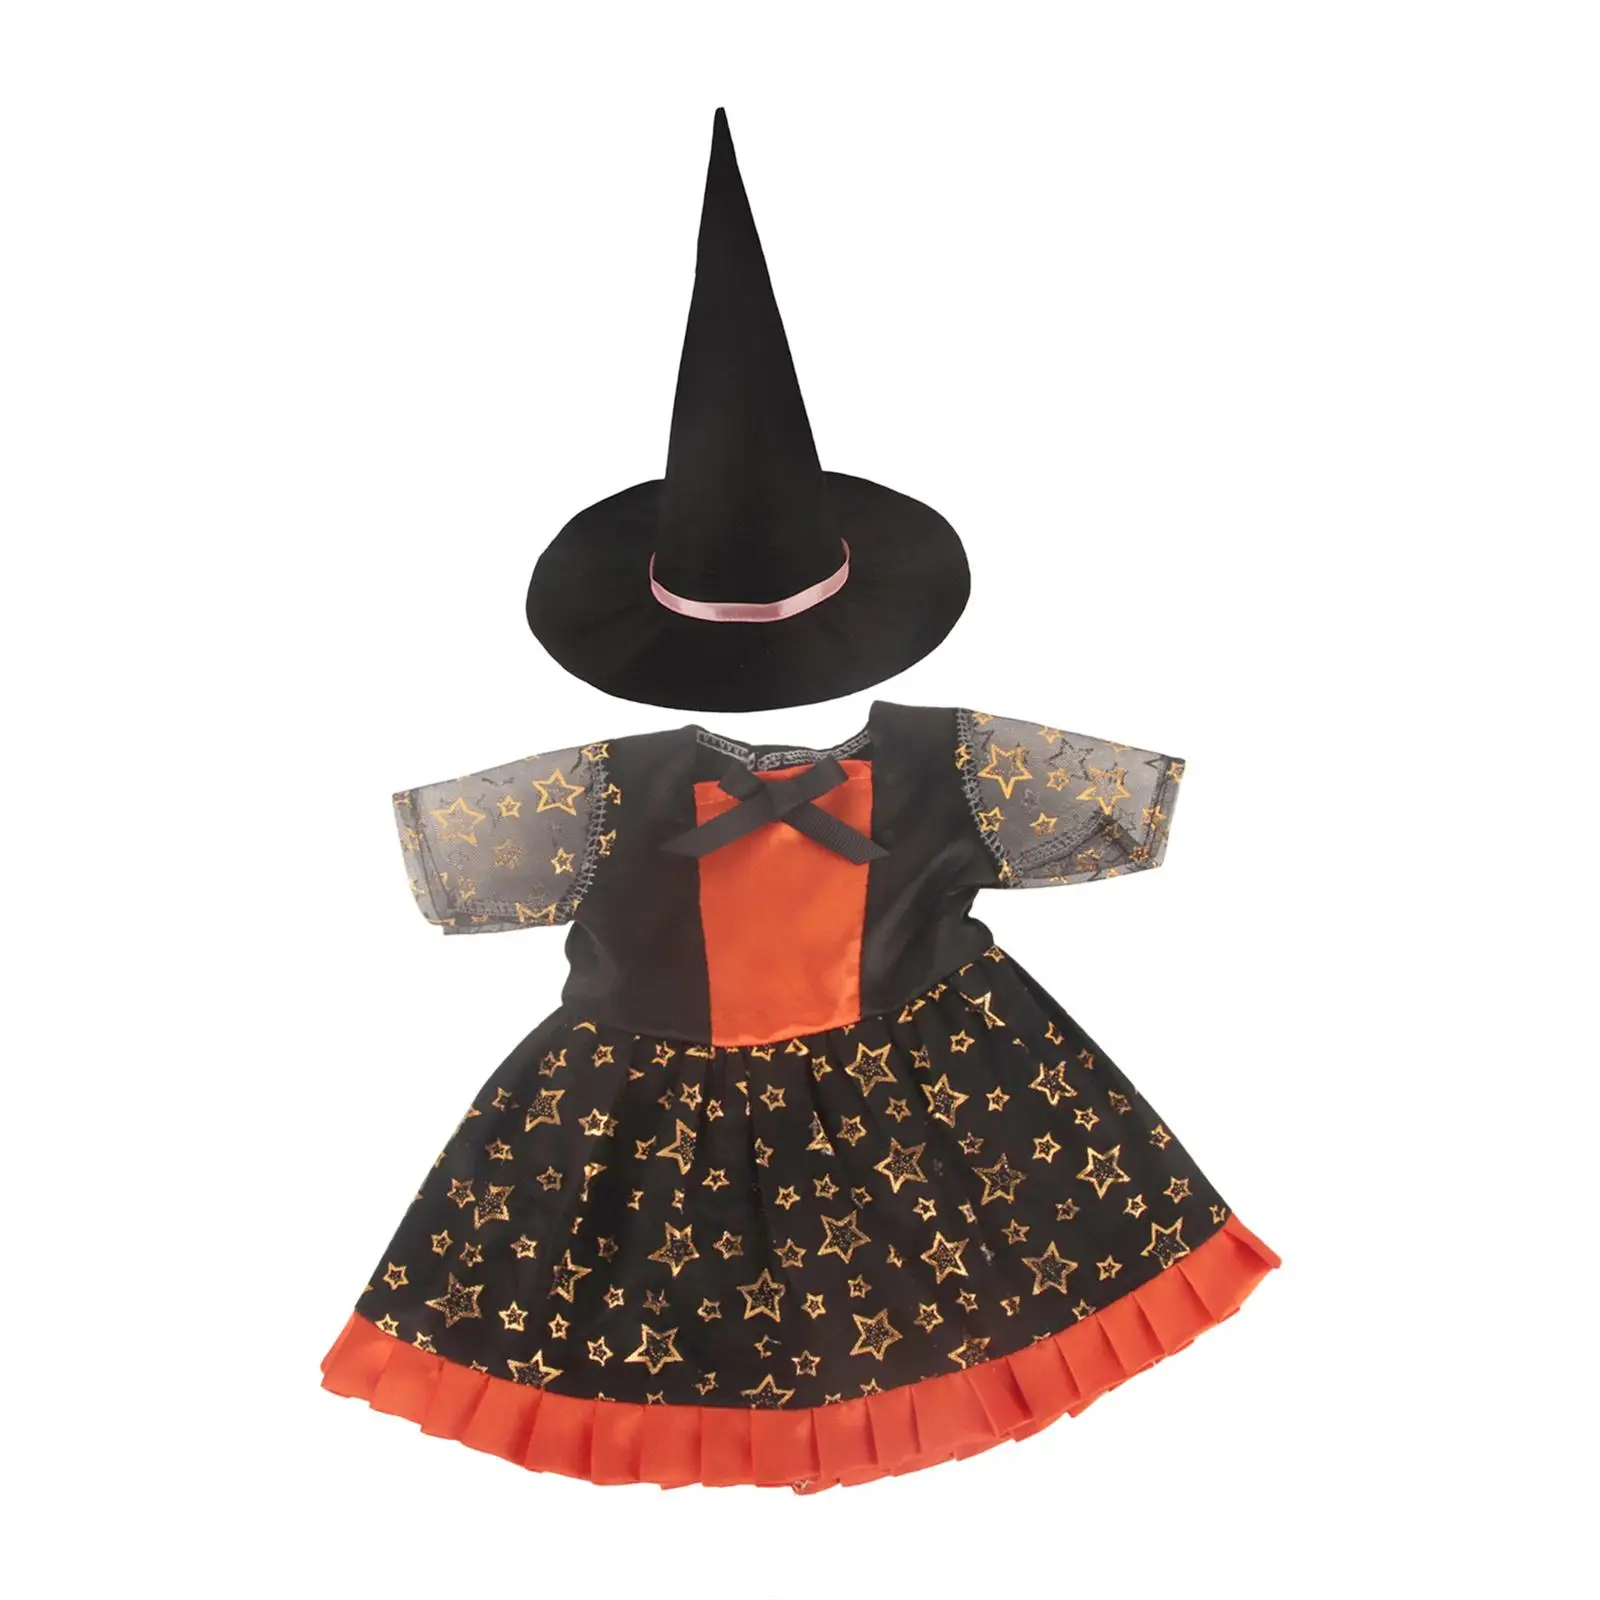 18`` Doll Dress Outfit Outfit Party Dress Halloween Doll Costumes for Cosplay Birthday Carnivals Festival Everyday Play